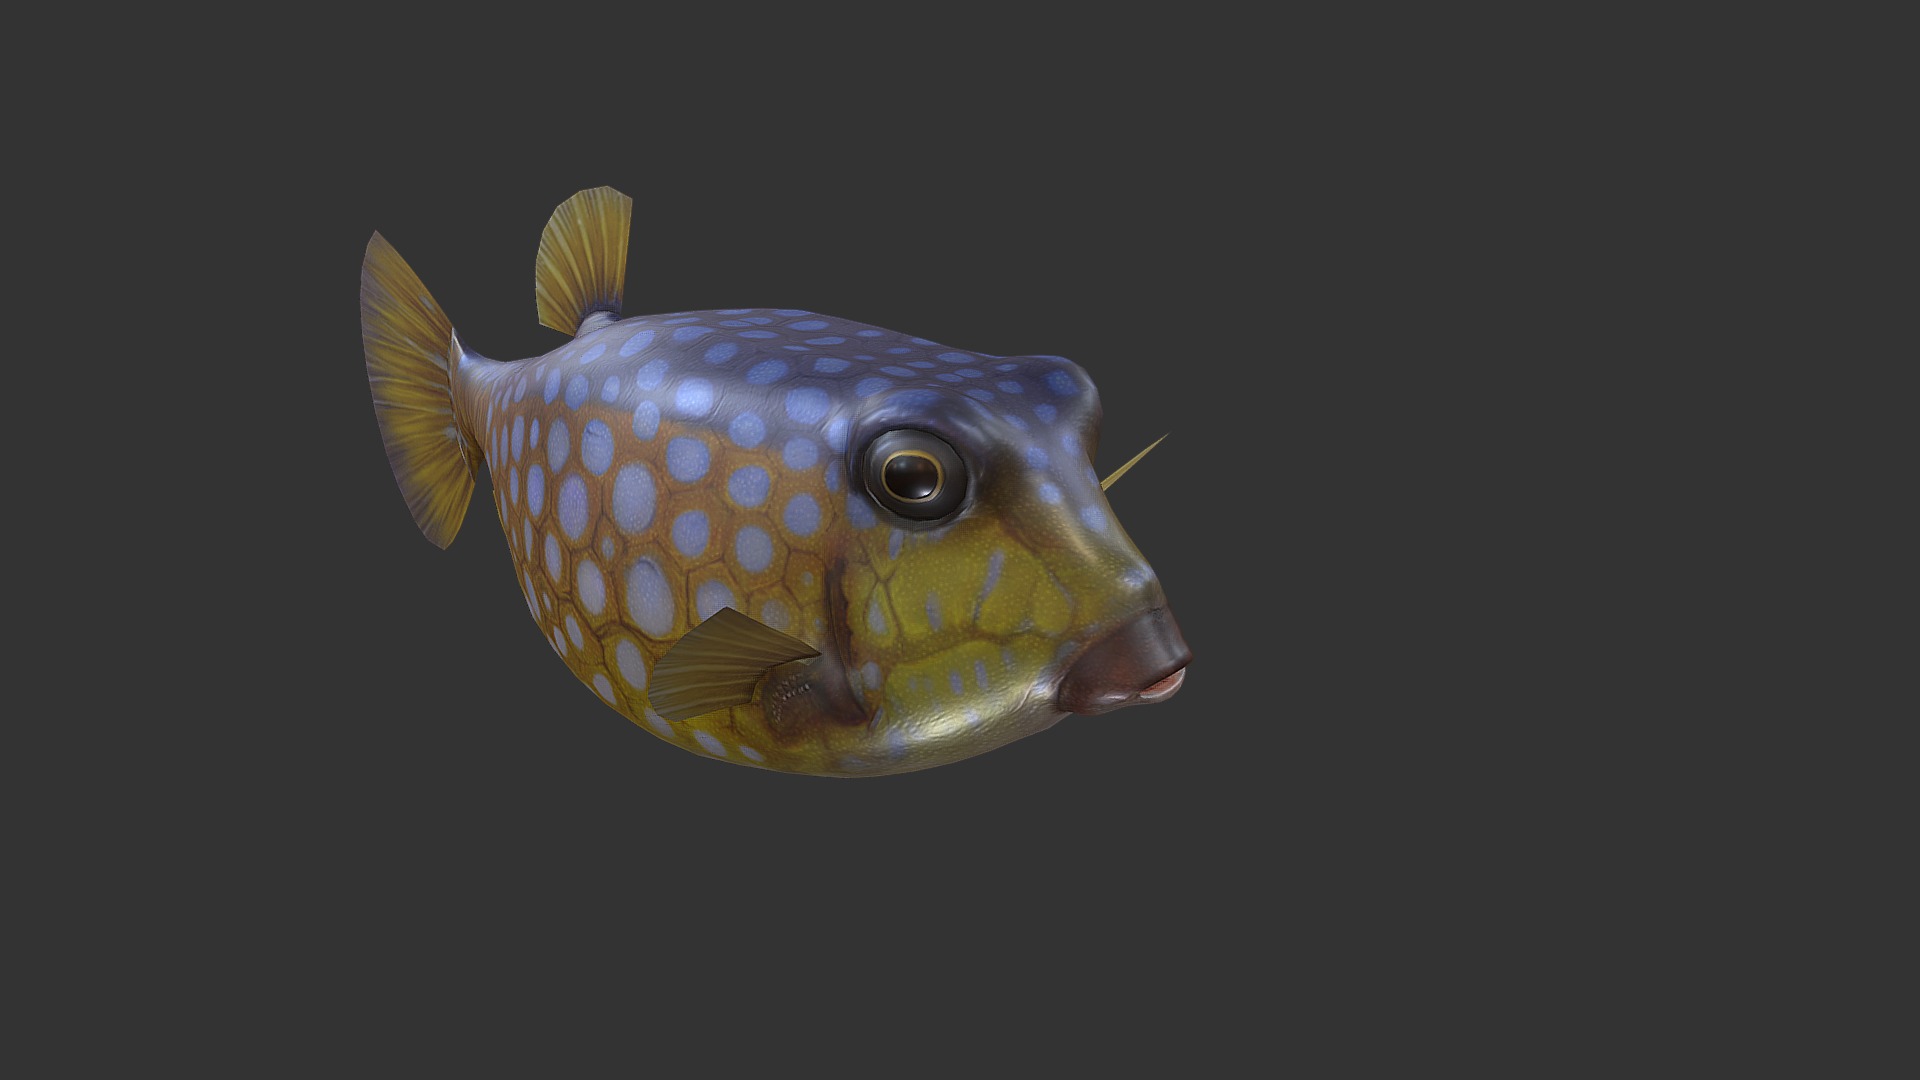 3D model Bo Hom - This is a 3D model of the Bo Hom. The 3D model is about a fish with a yellow and purple striped tail.